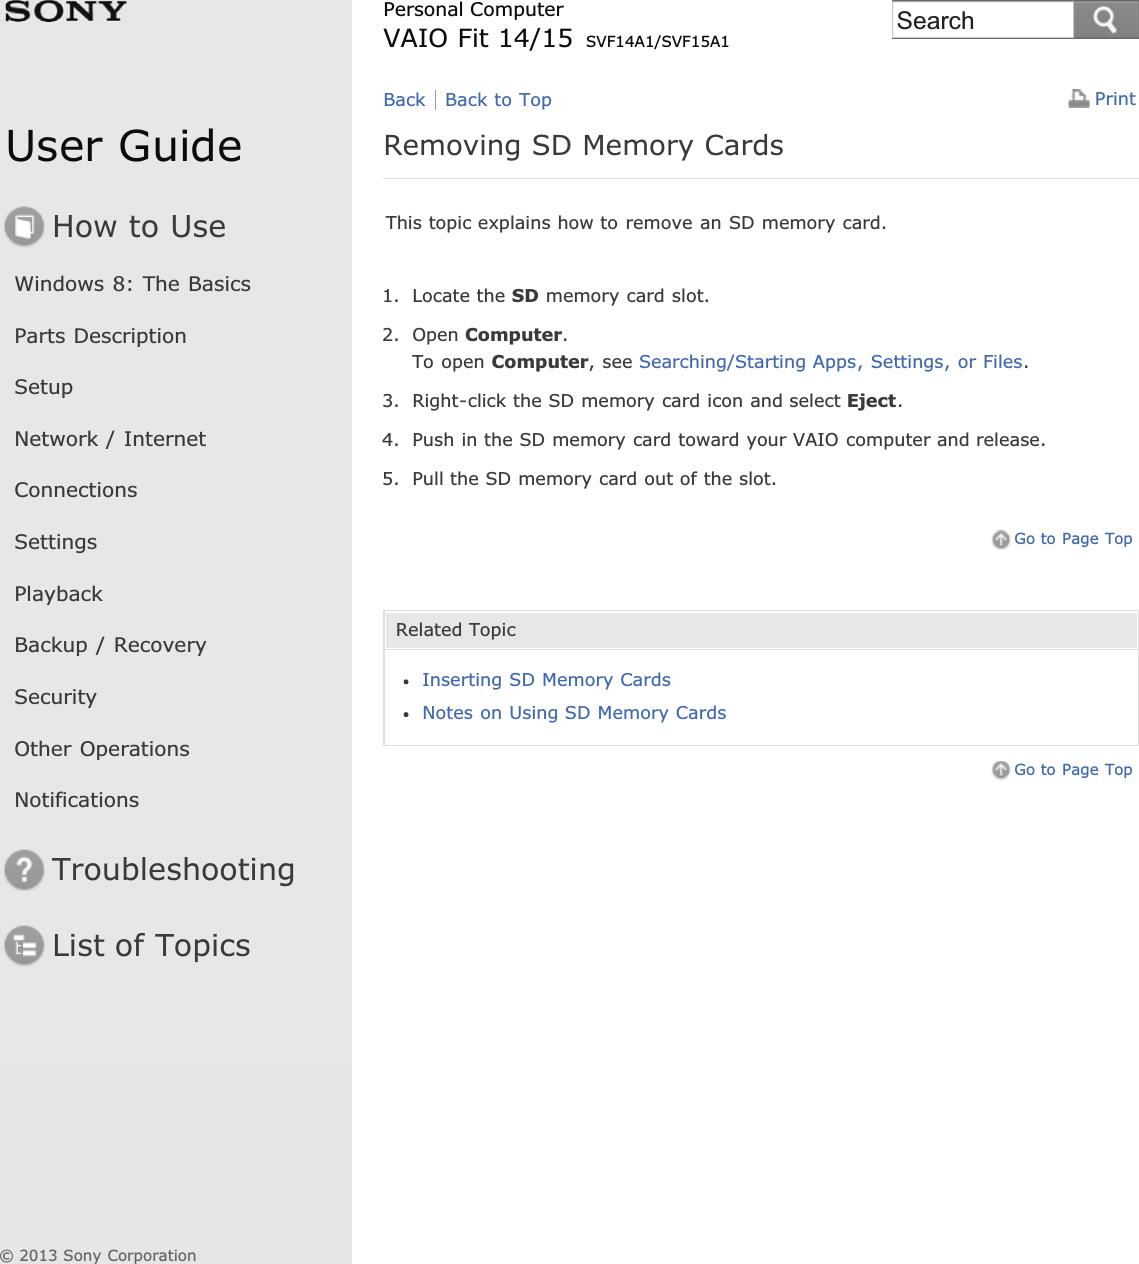 User GuideHow to UseWindows 8: The BasicsParts DescriptionSetupNetwork / InternetConnectionsSettingsPlaybackBackup / RecoverySecurityOther OperationsNotificationsTroubleshootingList of TopicsPrintPersonal ComputerVAIO Fit 14/15 SVF14A1/SVF15A1Removing SD Memory CardsThis topic explains how to remove an SD memory card.1. Locate the SD memory card slot.2. Open Computer.To open Computer, see Searching/Starting Apps, Settings, or Files.3. Right-click the SD memory card icon and select Eject.4. Push in the SD memory card toward your VAIO computer and release.5. Pull the SD memory card out of the slot.Go to Page TopRelated TopicInserting SD Memory CardsNotes on Using SD Memory CardsGo to Page TopBack Back to Top© 2013 Sony CorporationSearch